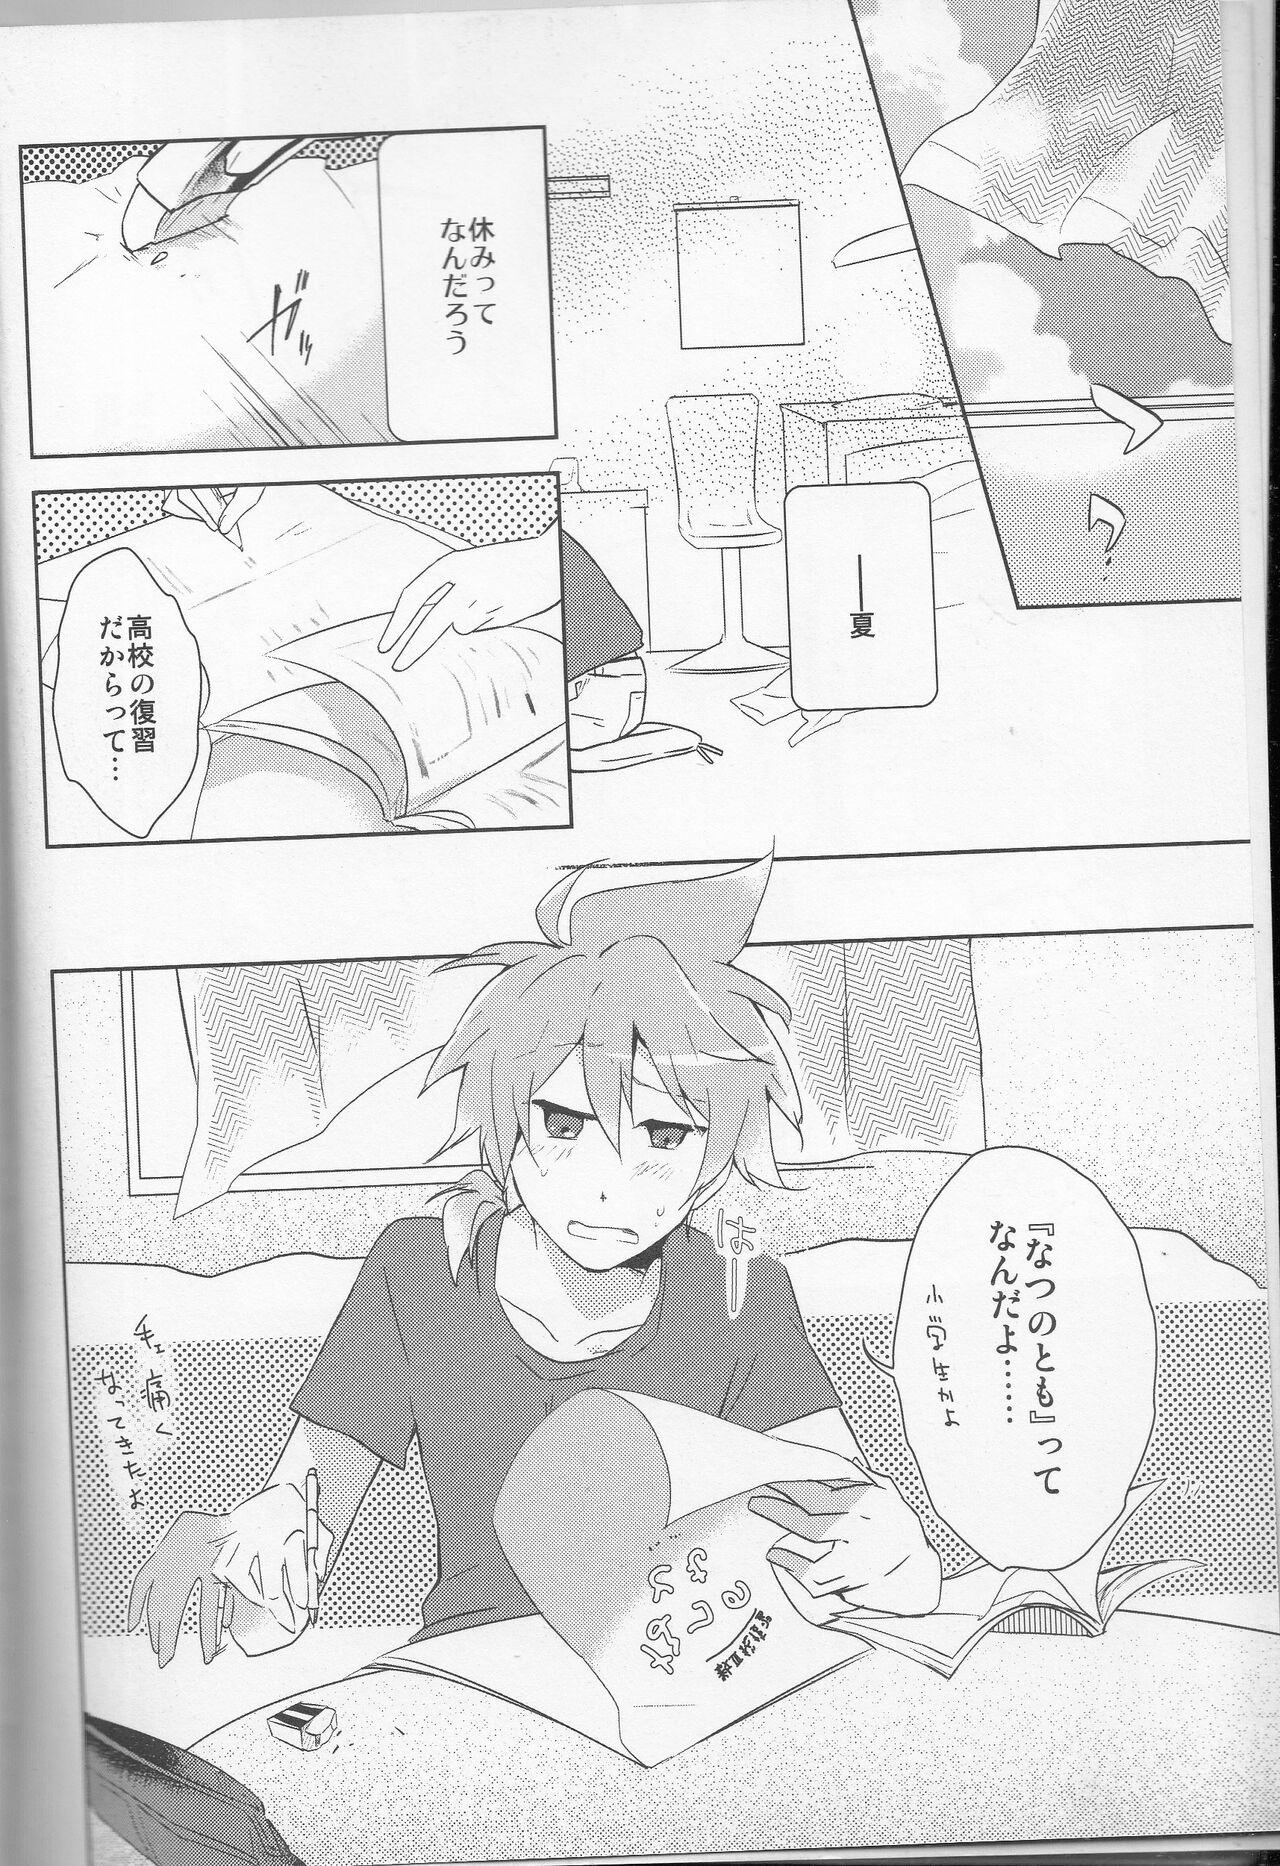 Hairypussy Ore no Ooyoso Kawaii Omocha - Vocaloid Girlfriend - Page 3